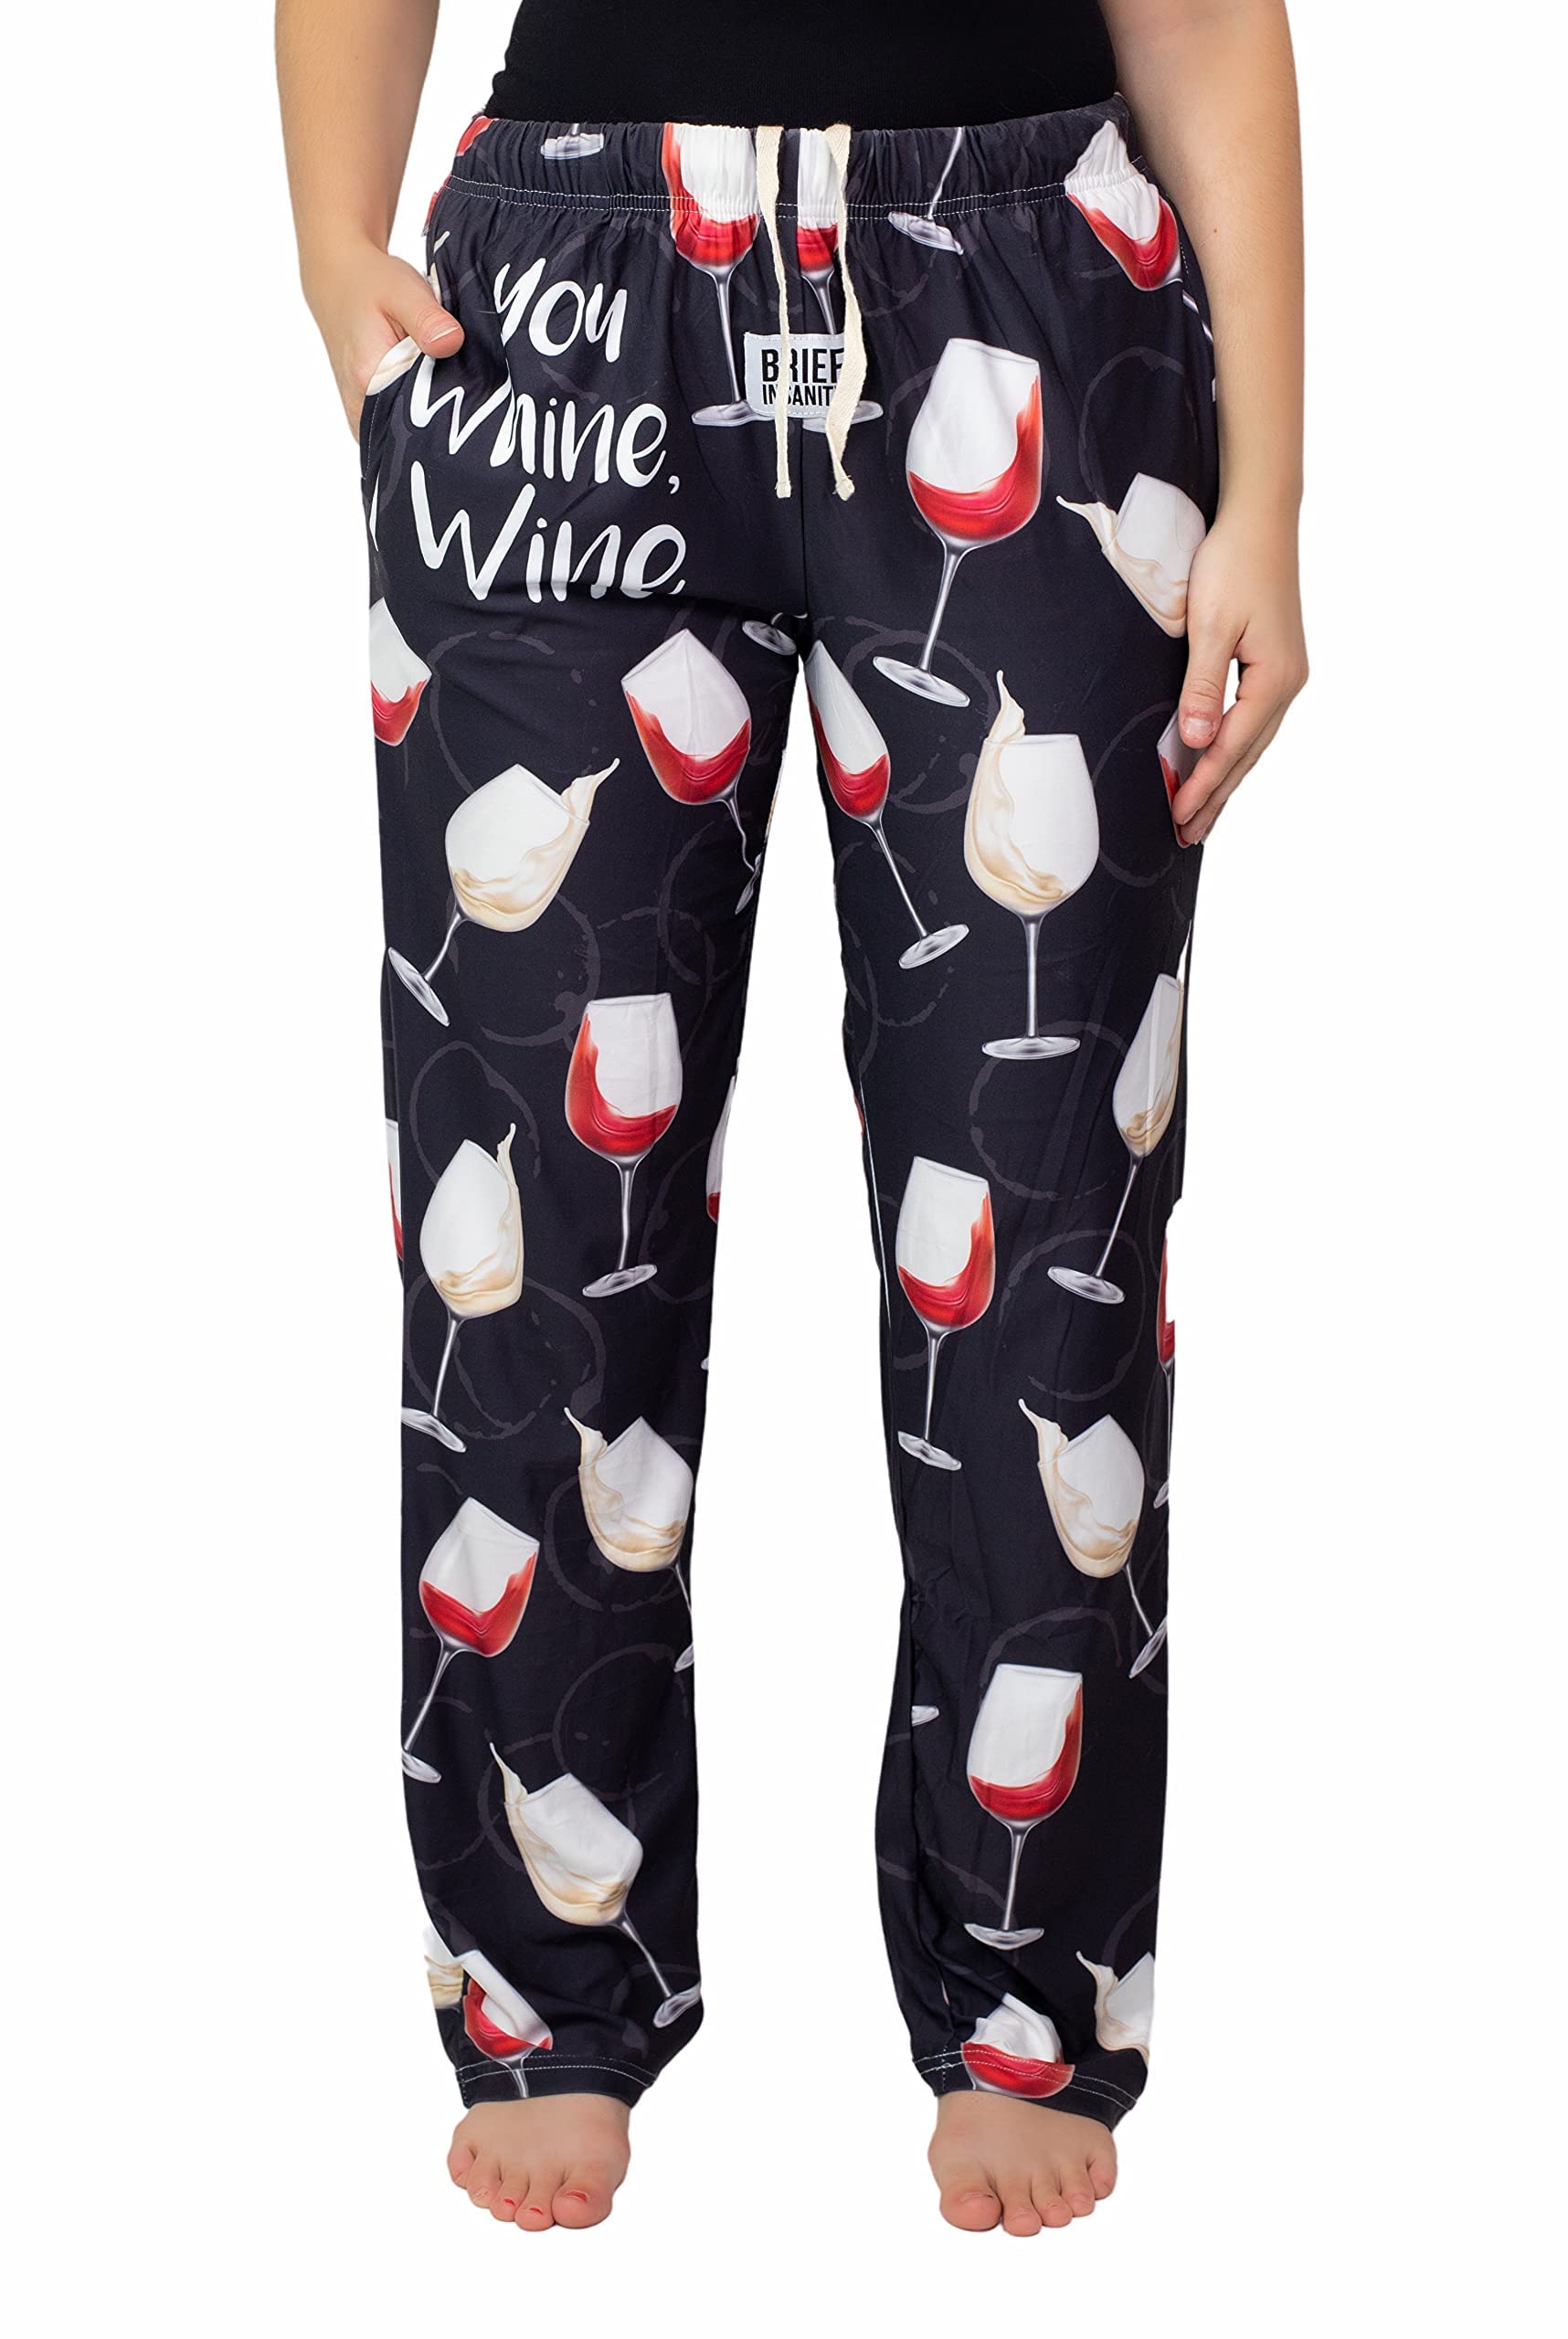 BRIEF INSANITY Lounge Pajamas Pants for Men and Women